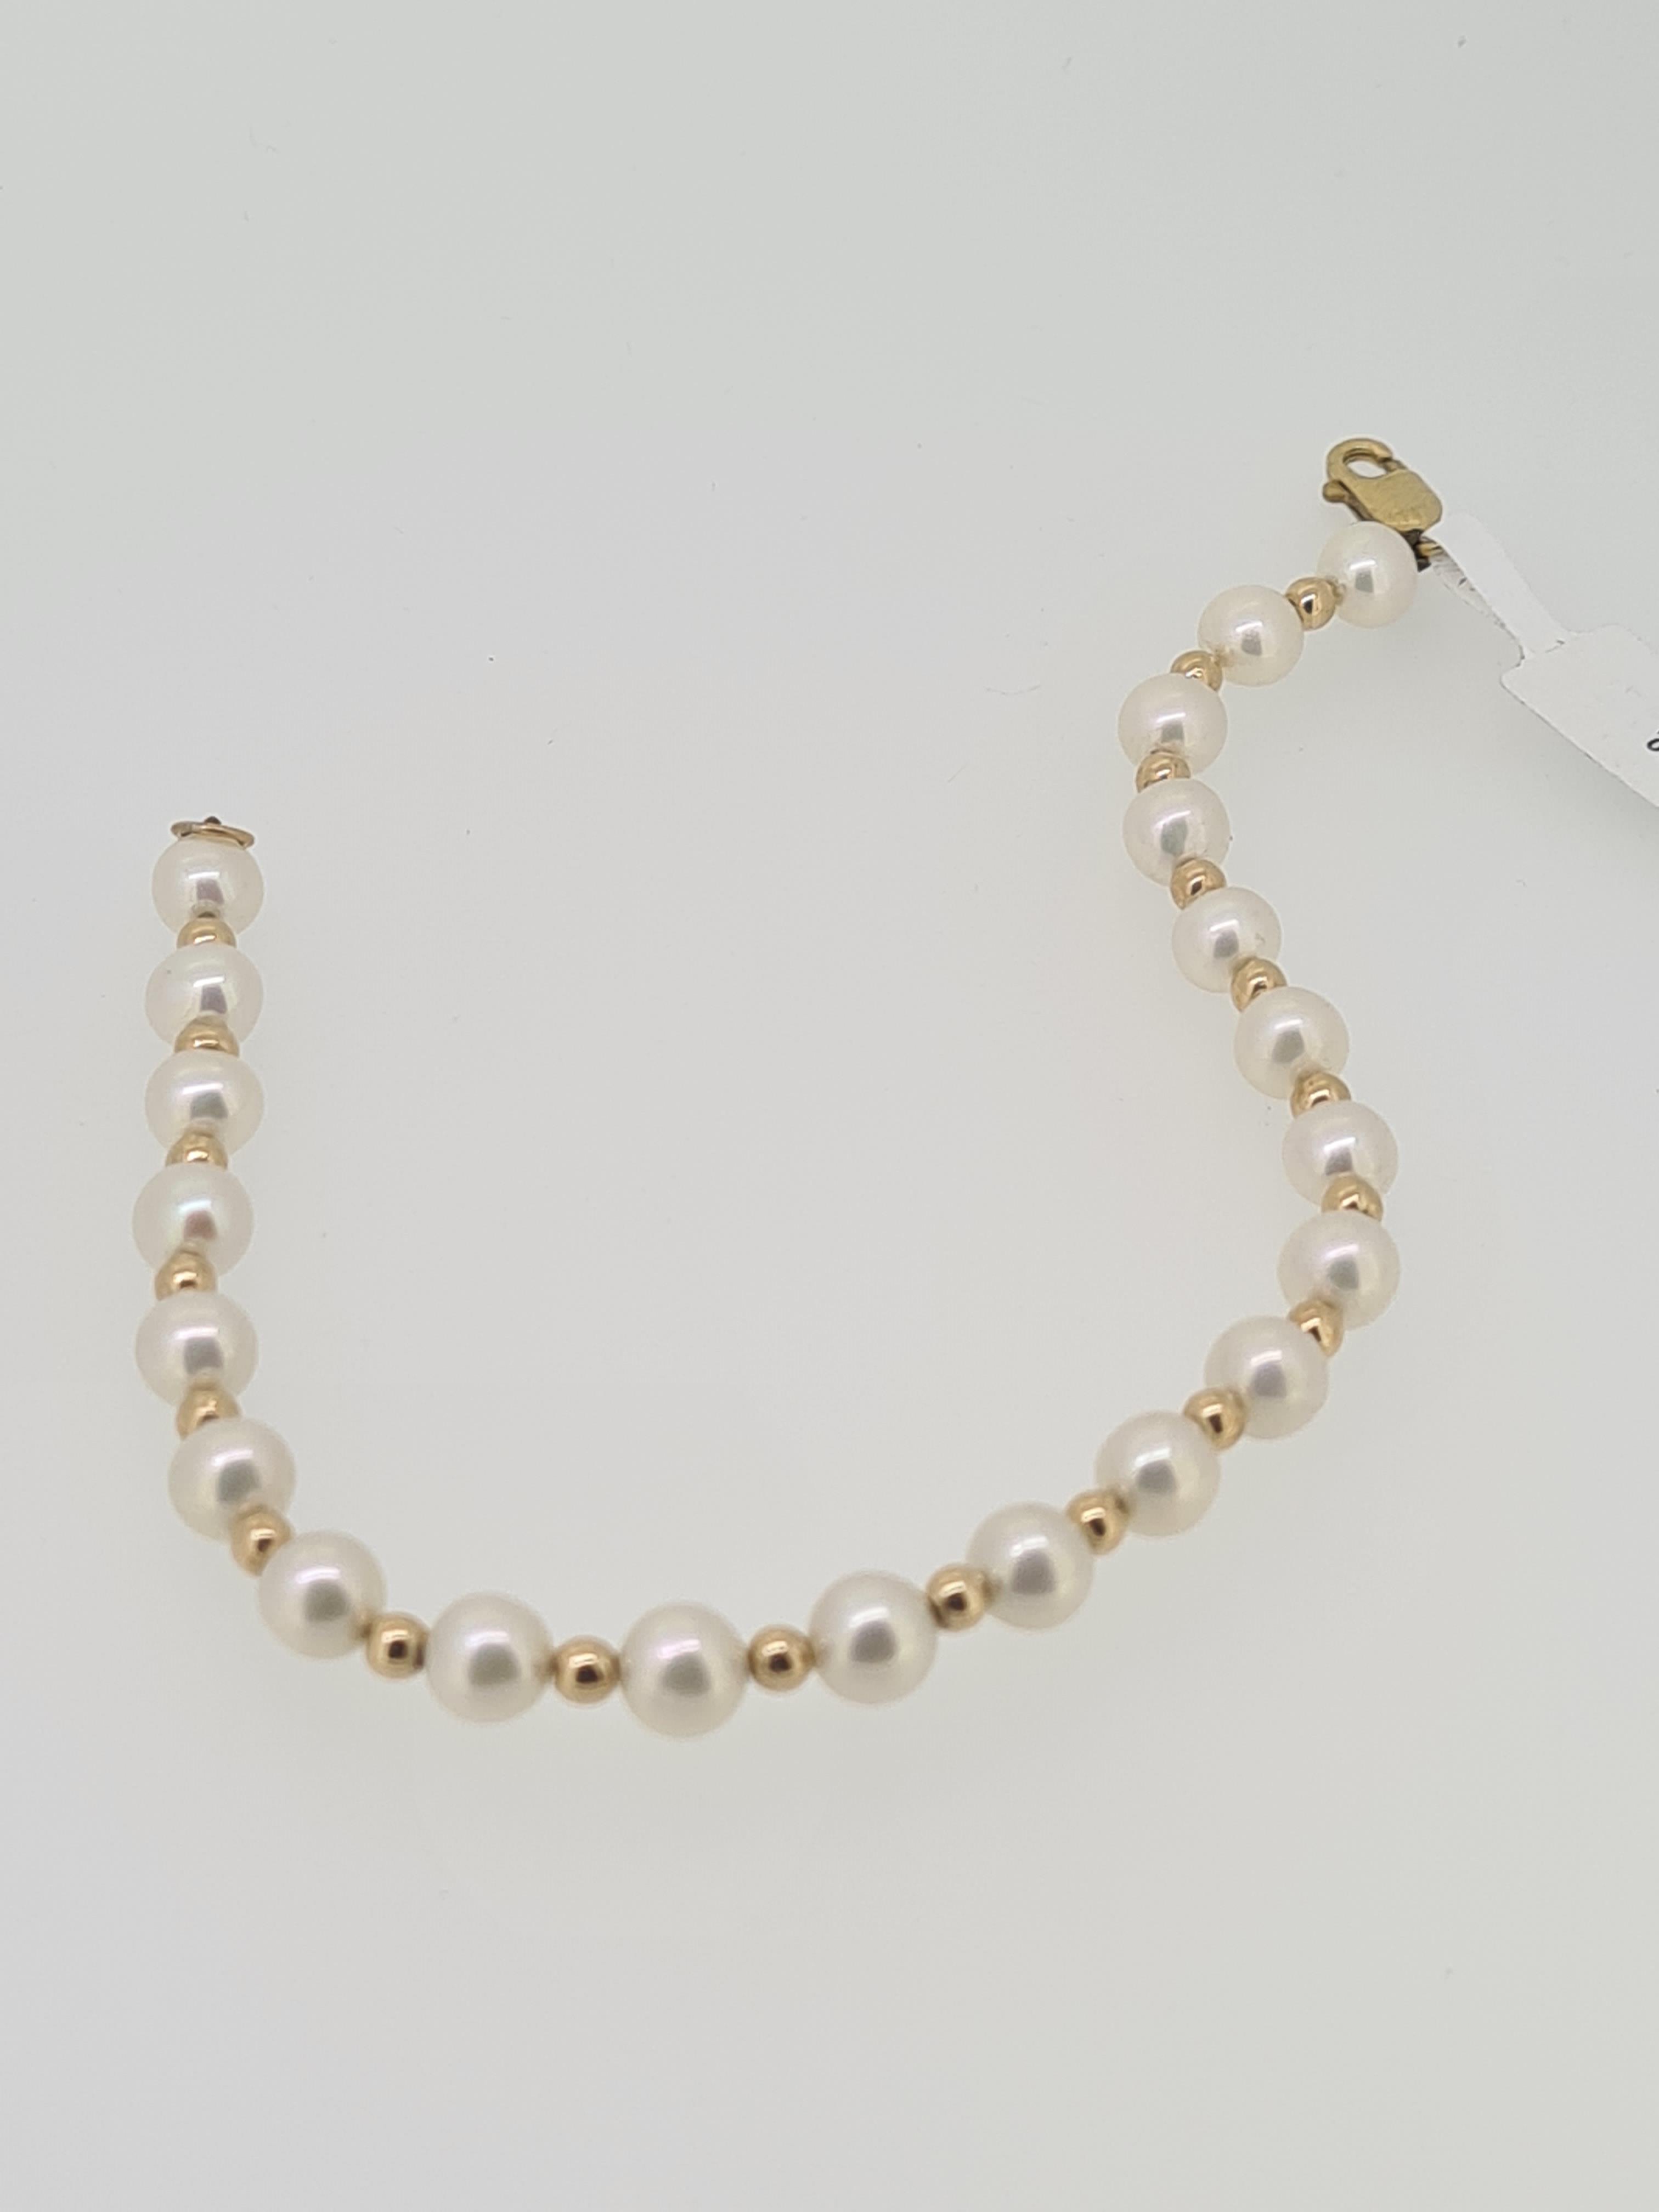 9ct yellow gold cultured pearl bracelet - Image 3 of 3